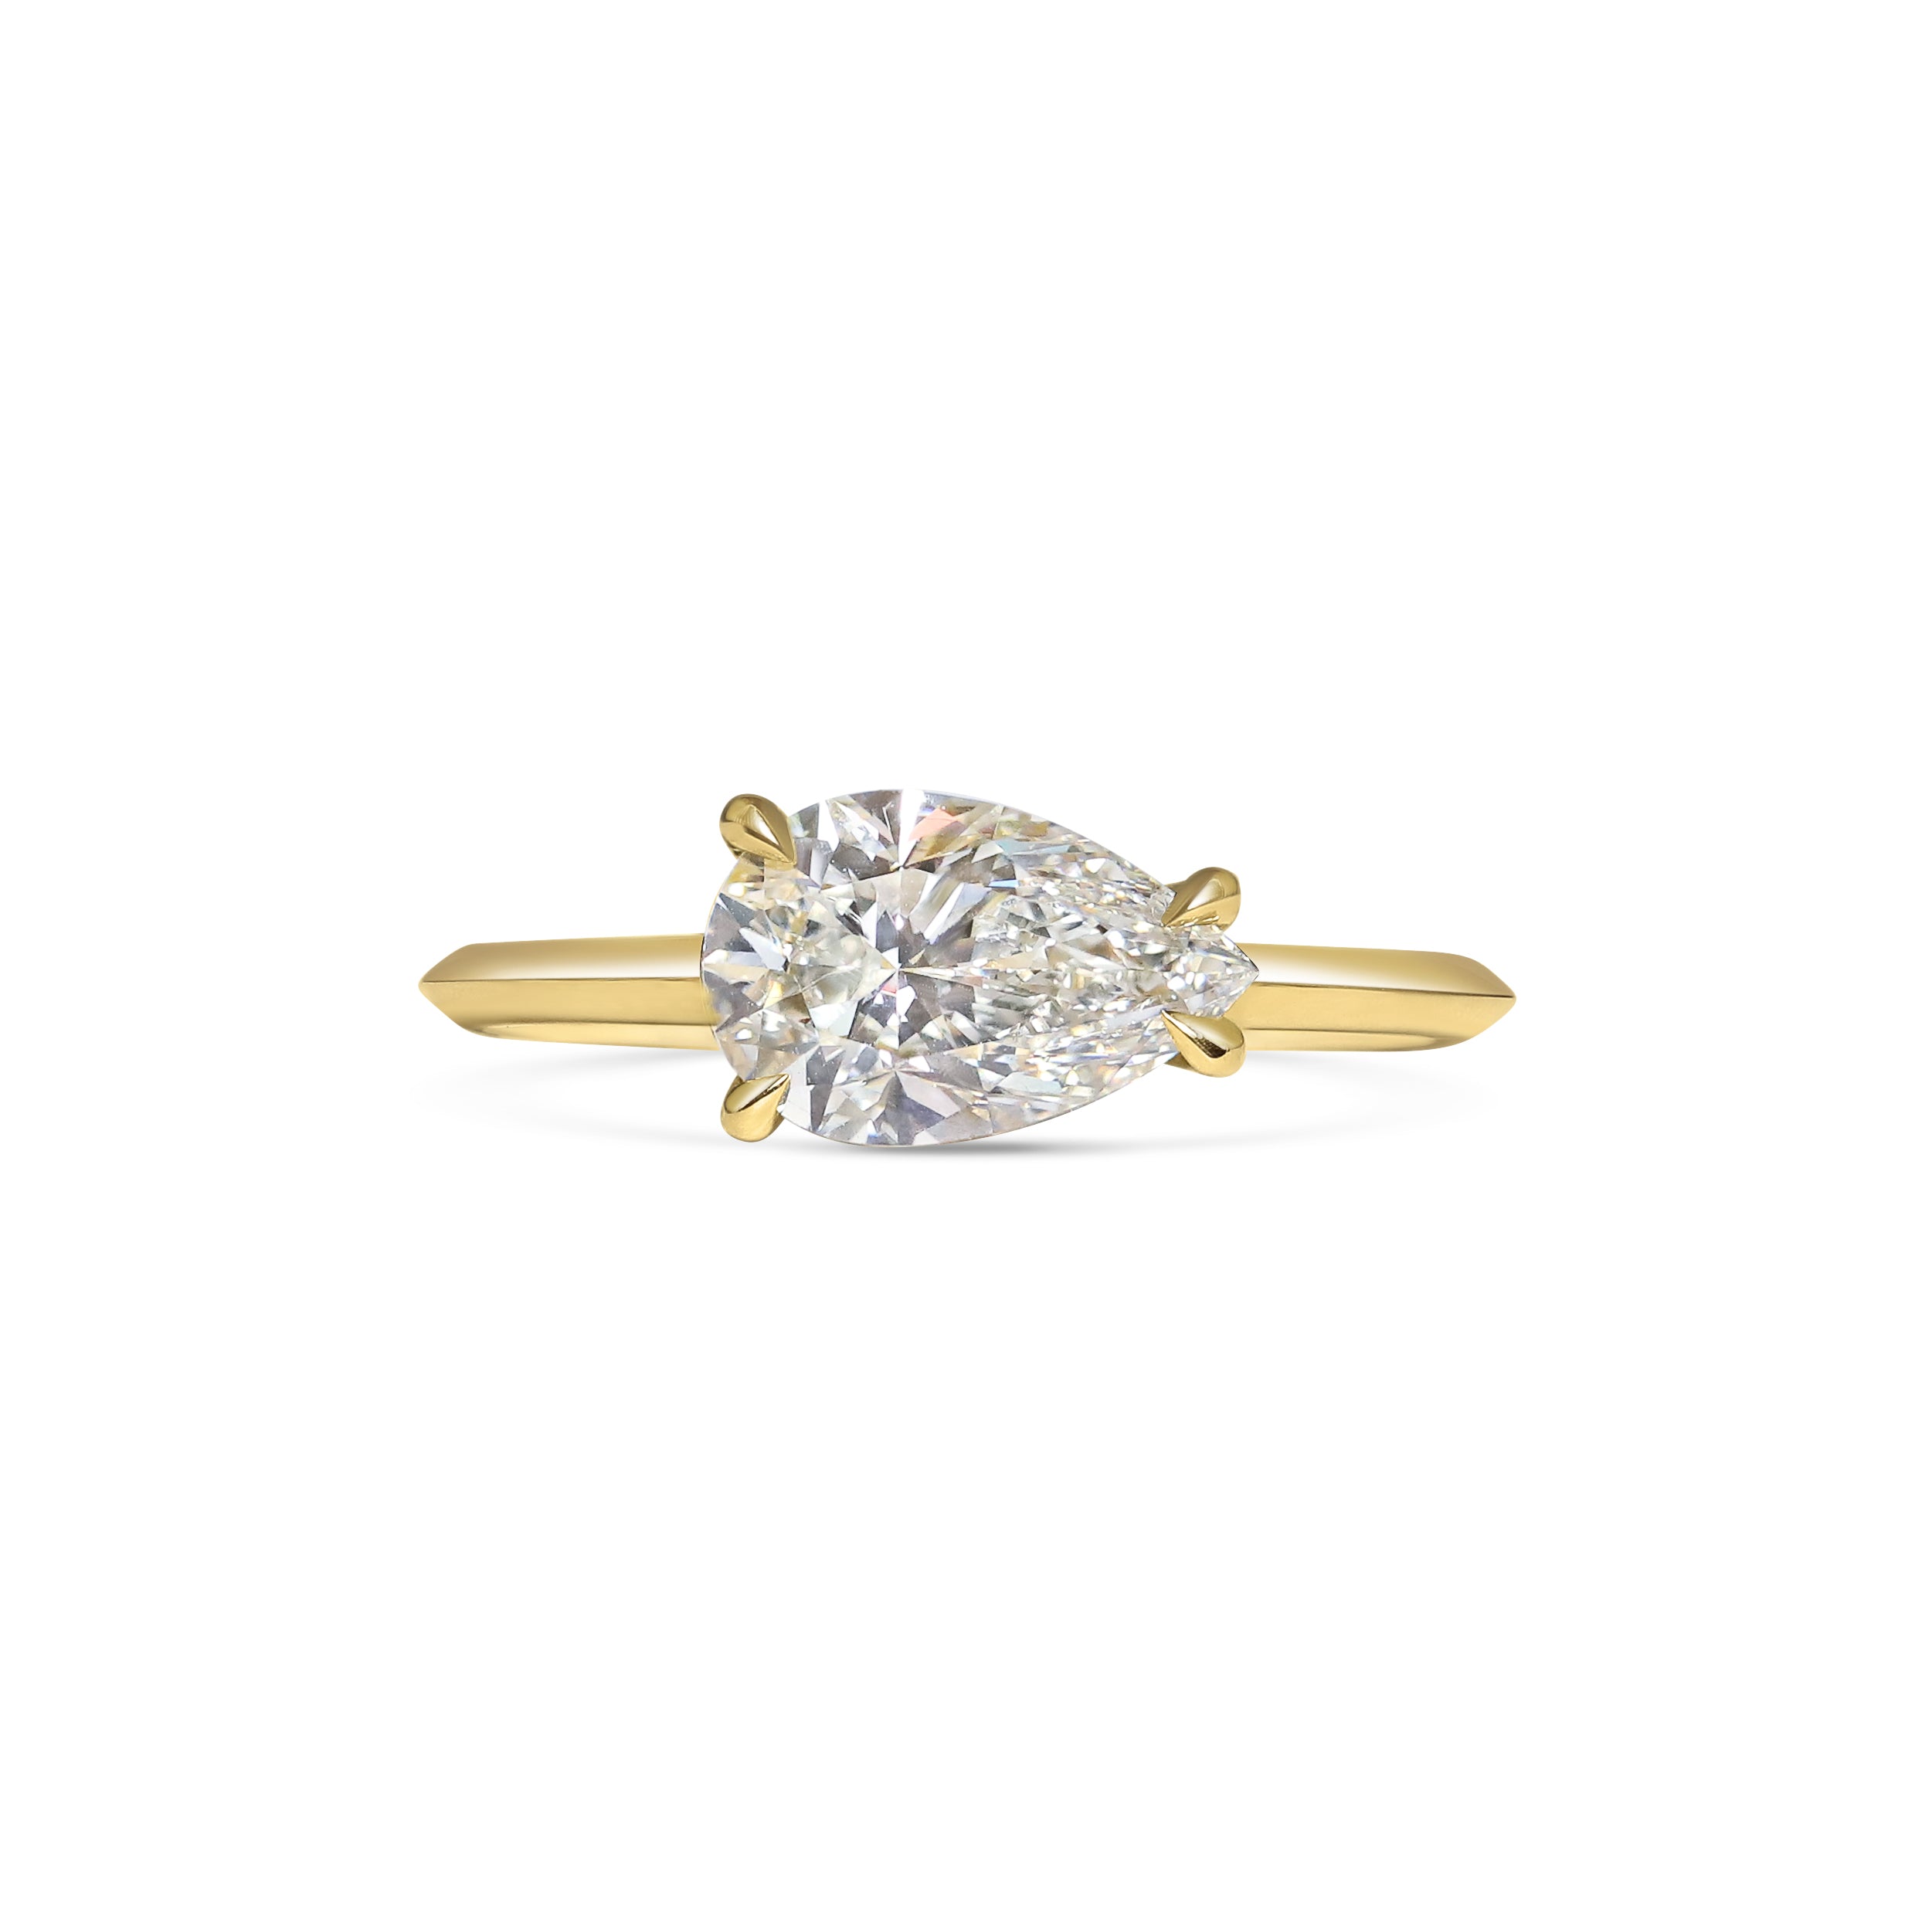 The Aisling Ring by East London jeweller Rachel Boston | Discover our collections of unique and timeless engagement rings, wedding rings, and modern fine jewellery.